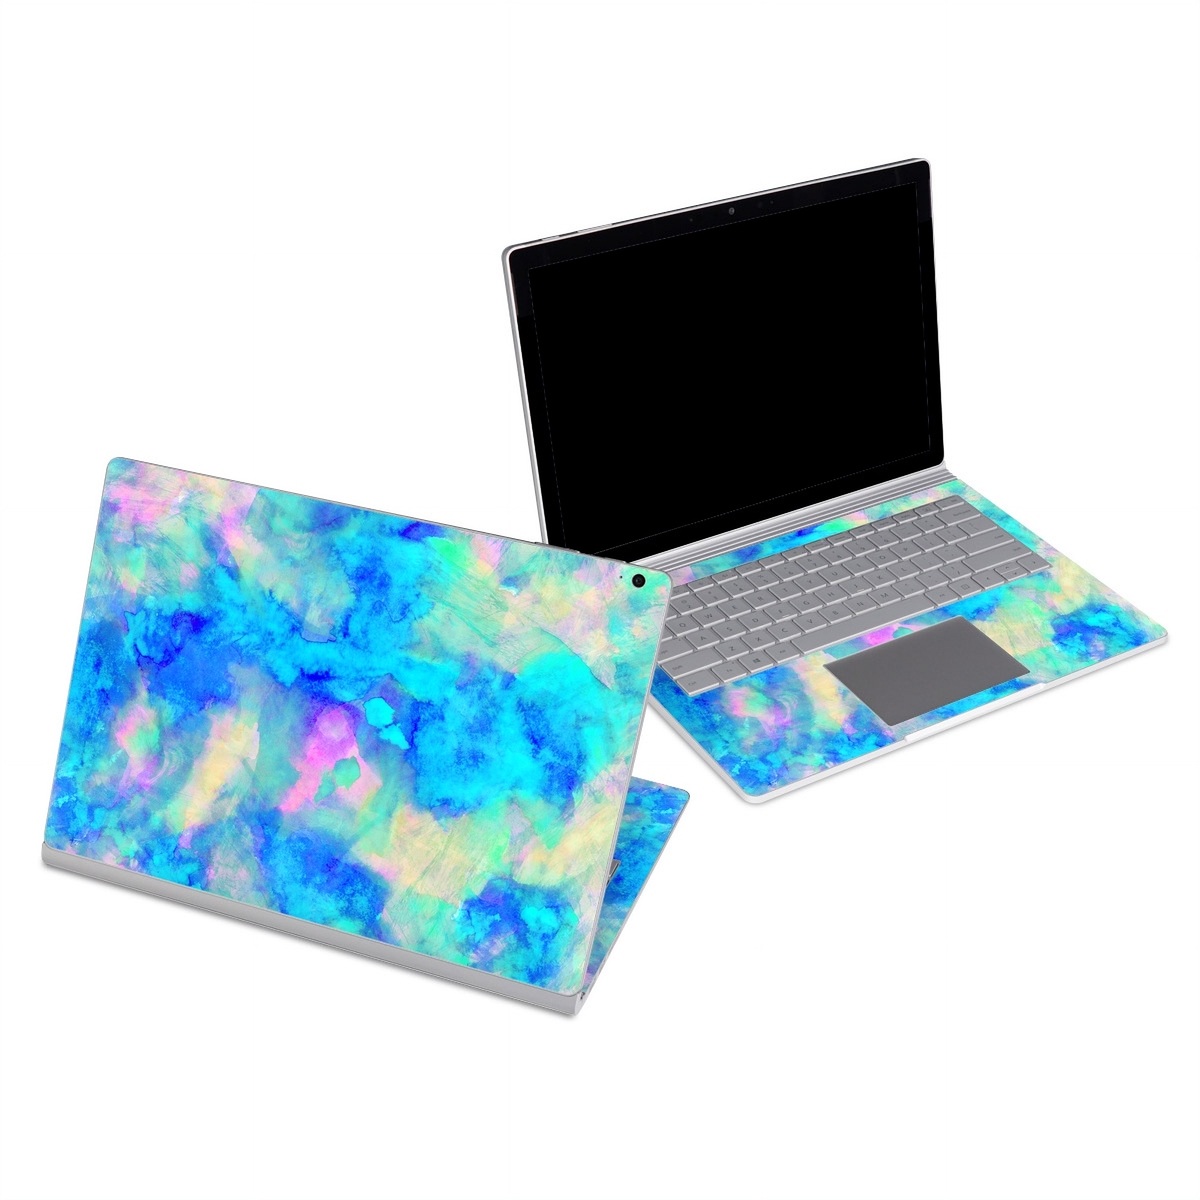 Microsoft Surface Book Series Skin design of Blue, Turquoise, Aqua, Pattern, Dye, Design, Sky, Electric blue, Art, Watercolor paint, with blue, purple colors